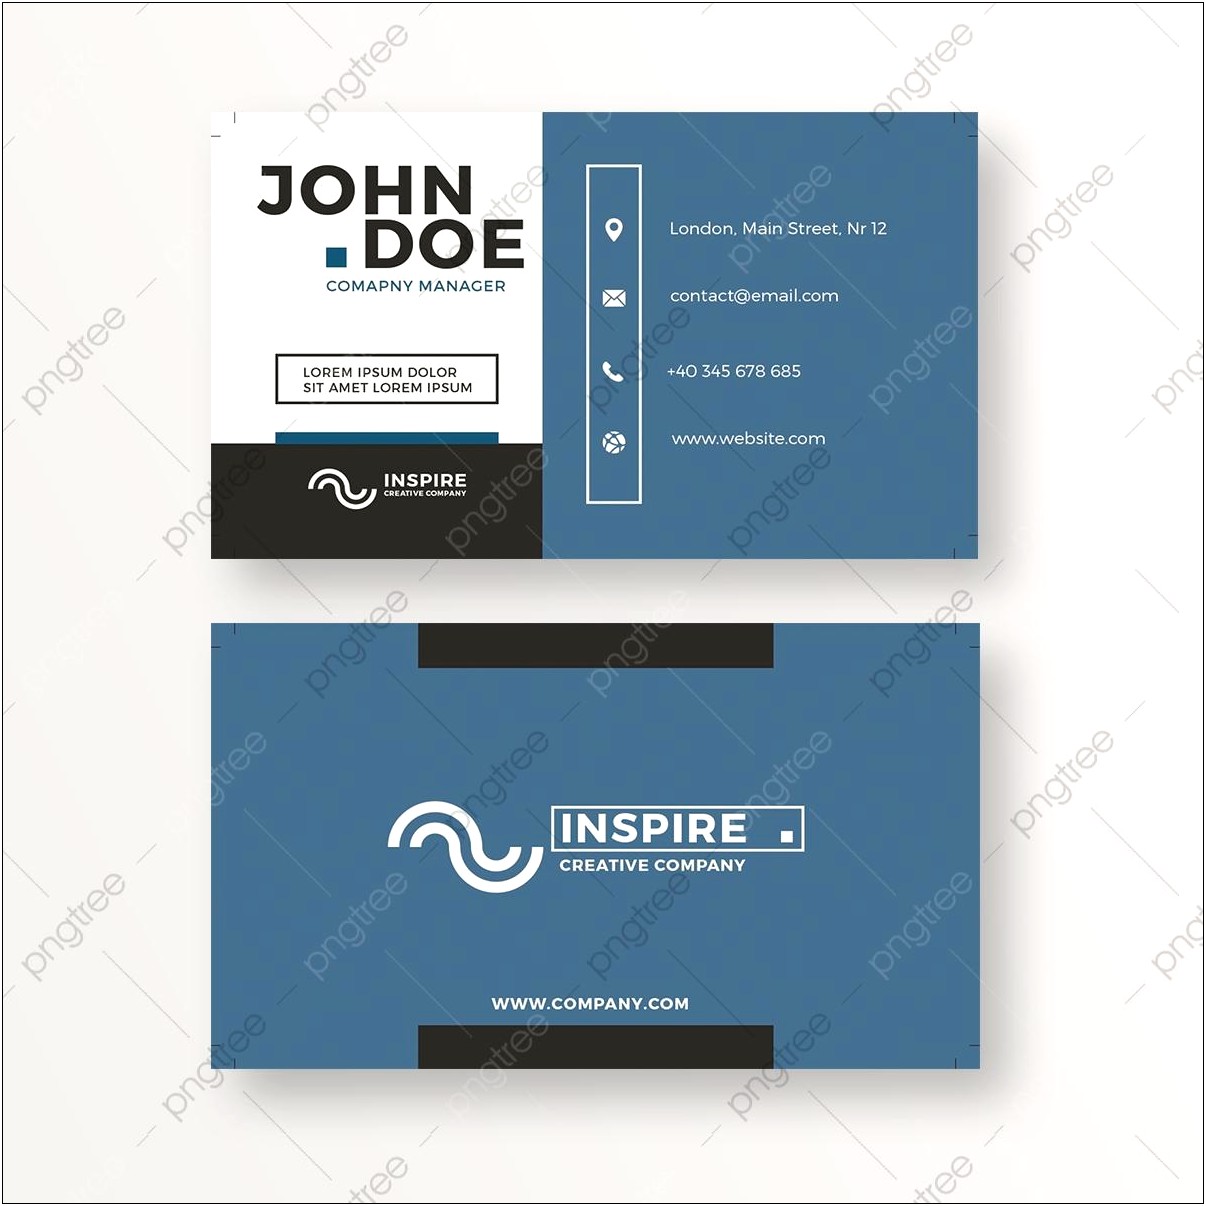 Business Card Photoshop Template Psd Free